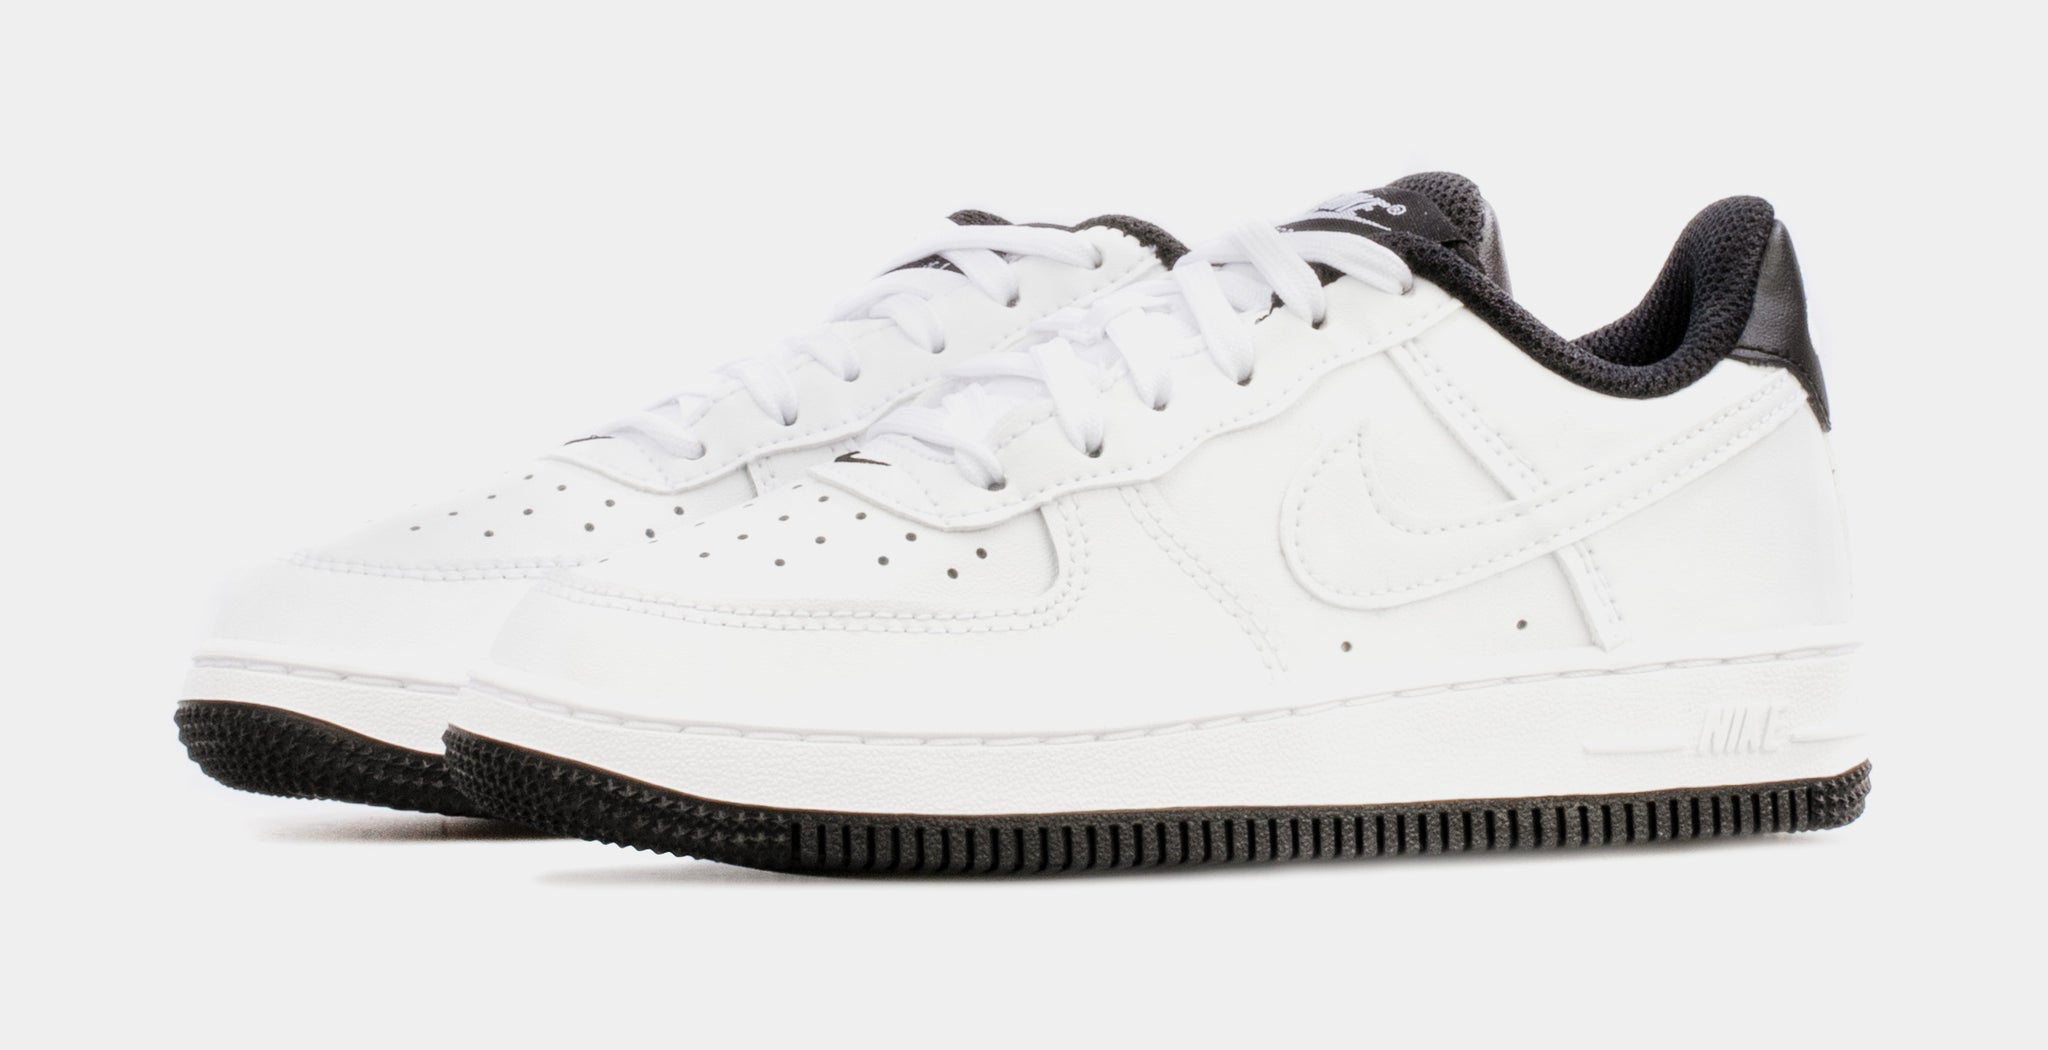 Nike Air Force 1 Low Preschool Lifestyle Shoes